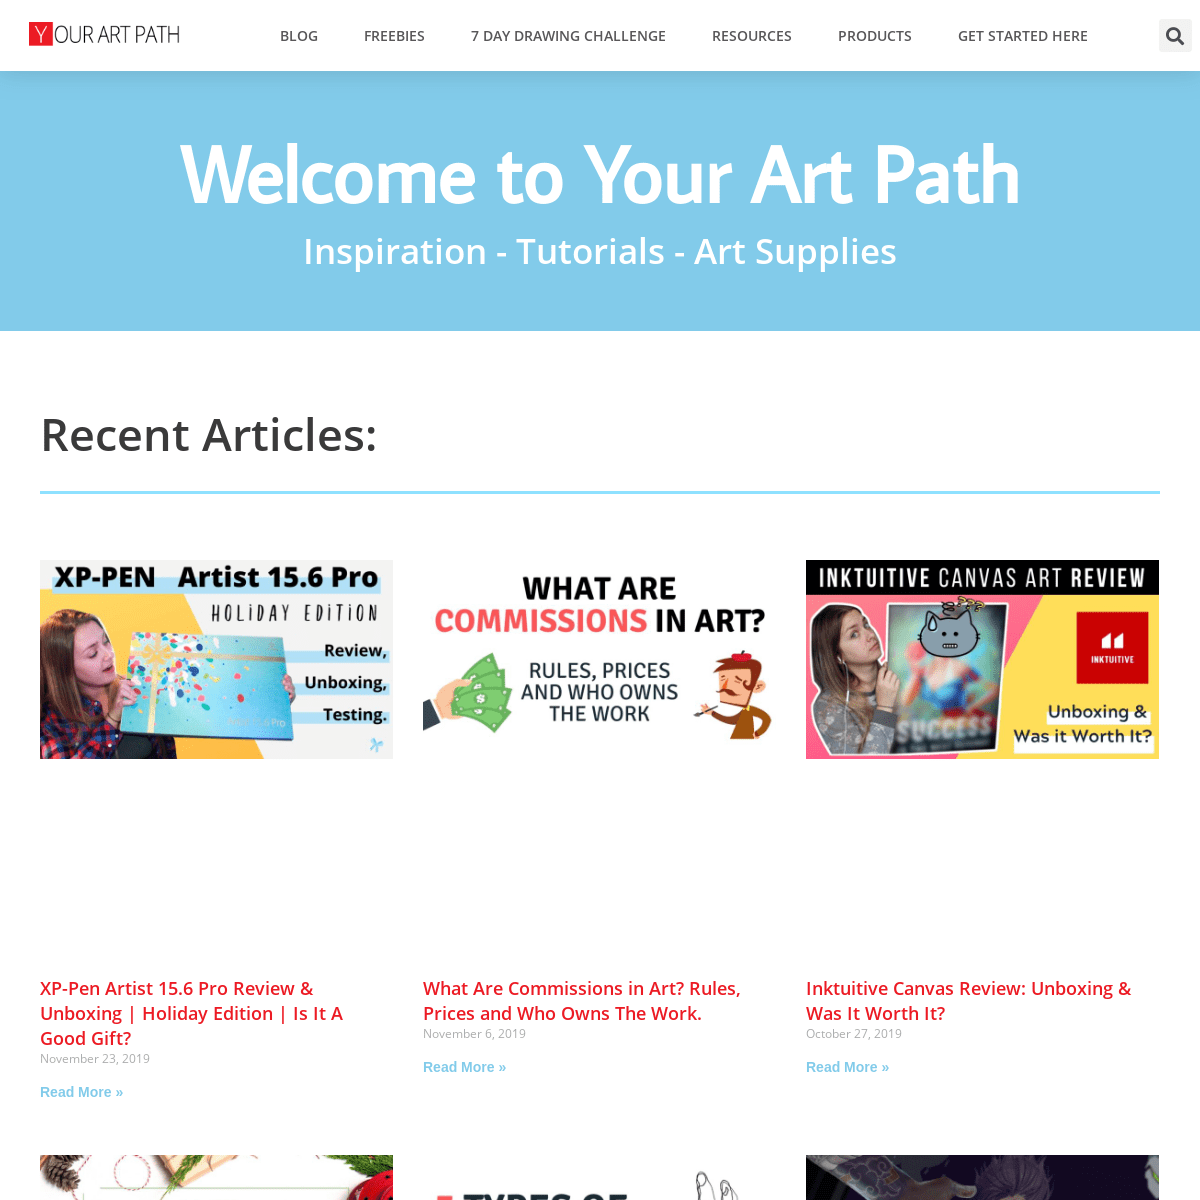 A complete backup of yourartpath.com